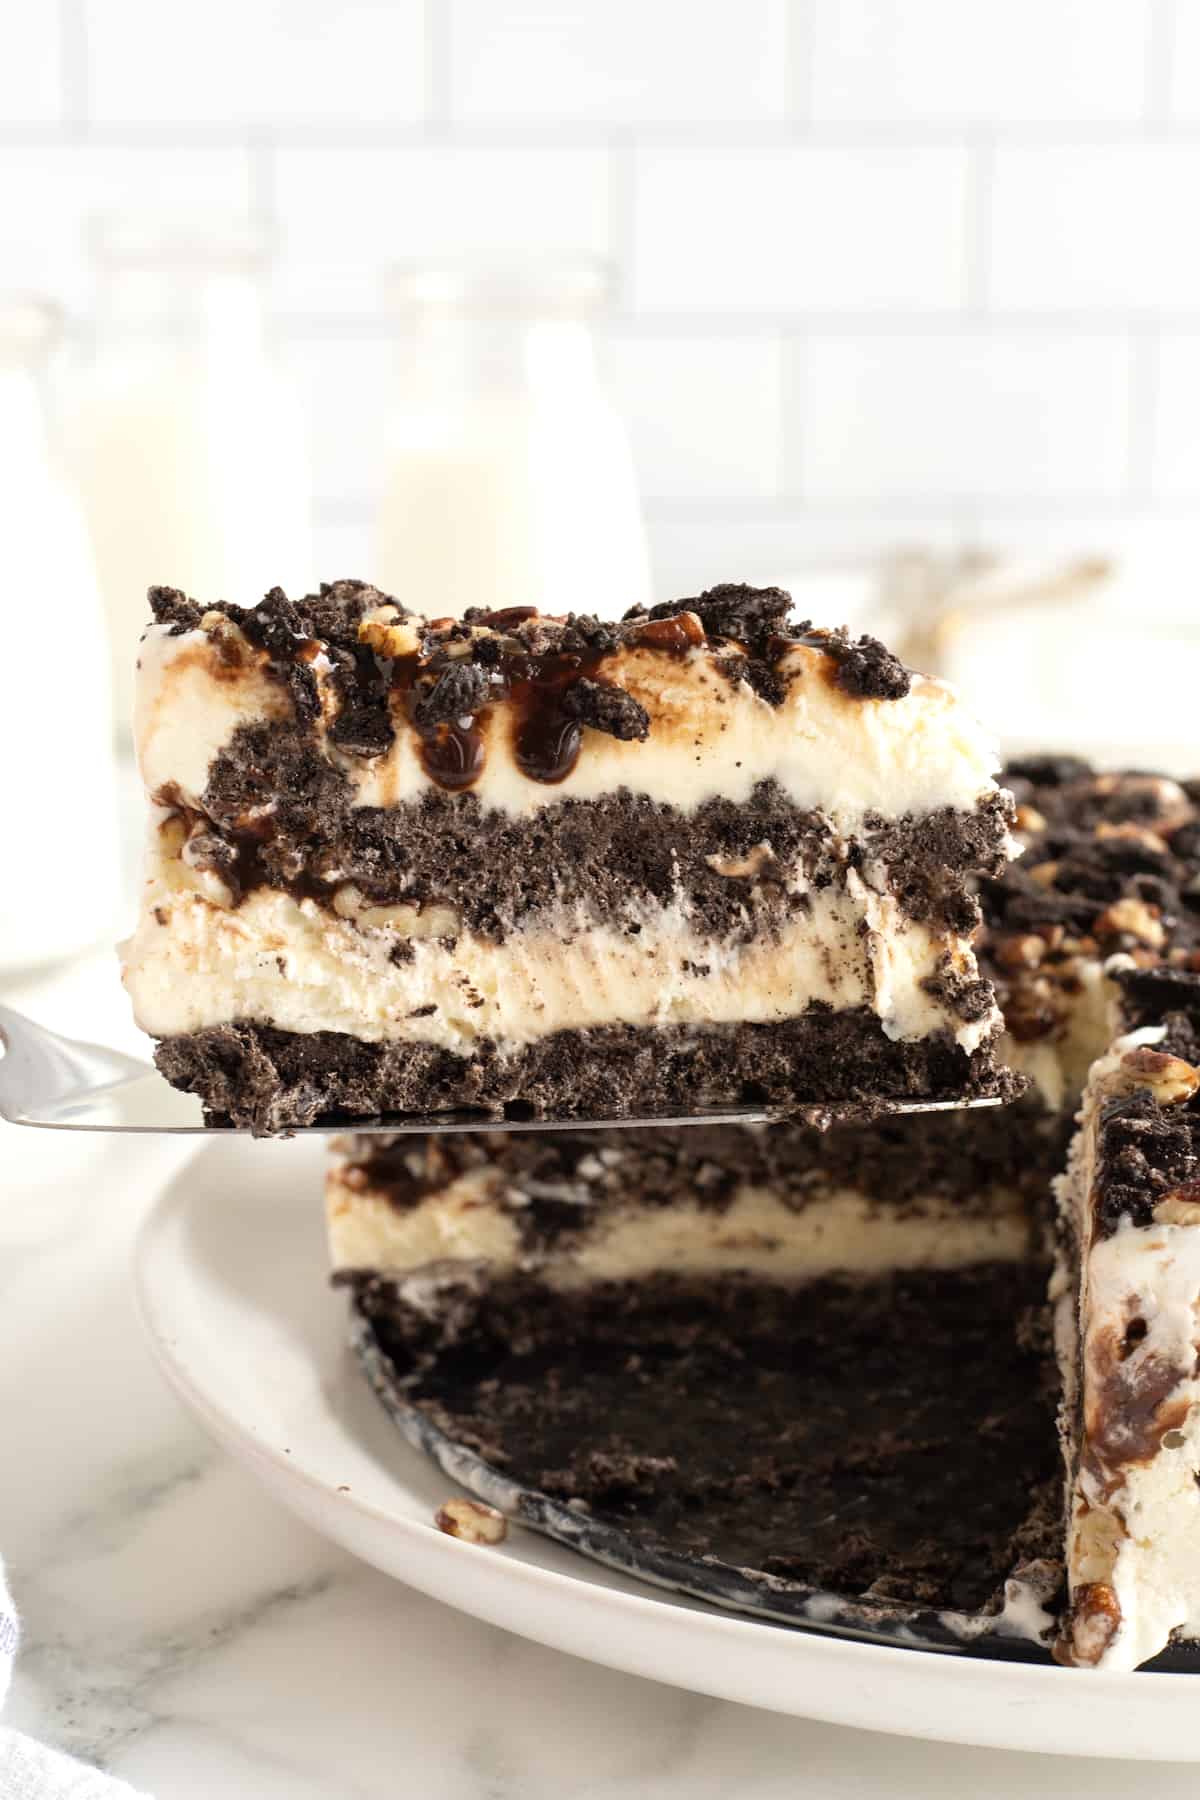 A slice of ice cream pie with an Oreo crust, ice ream filling, and crushed Oreos, chopped pecans and chocolate syrup on top.